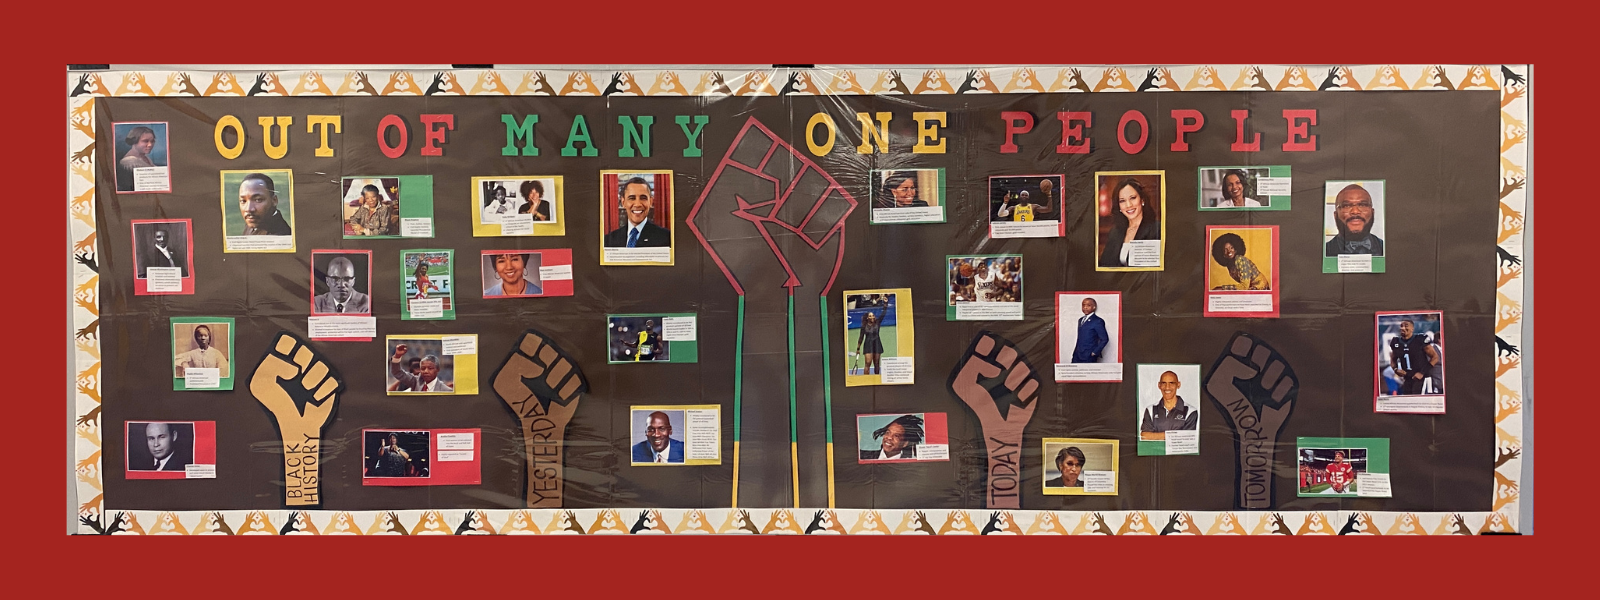 Black History Month Bulletin Board Created by Staff & Students